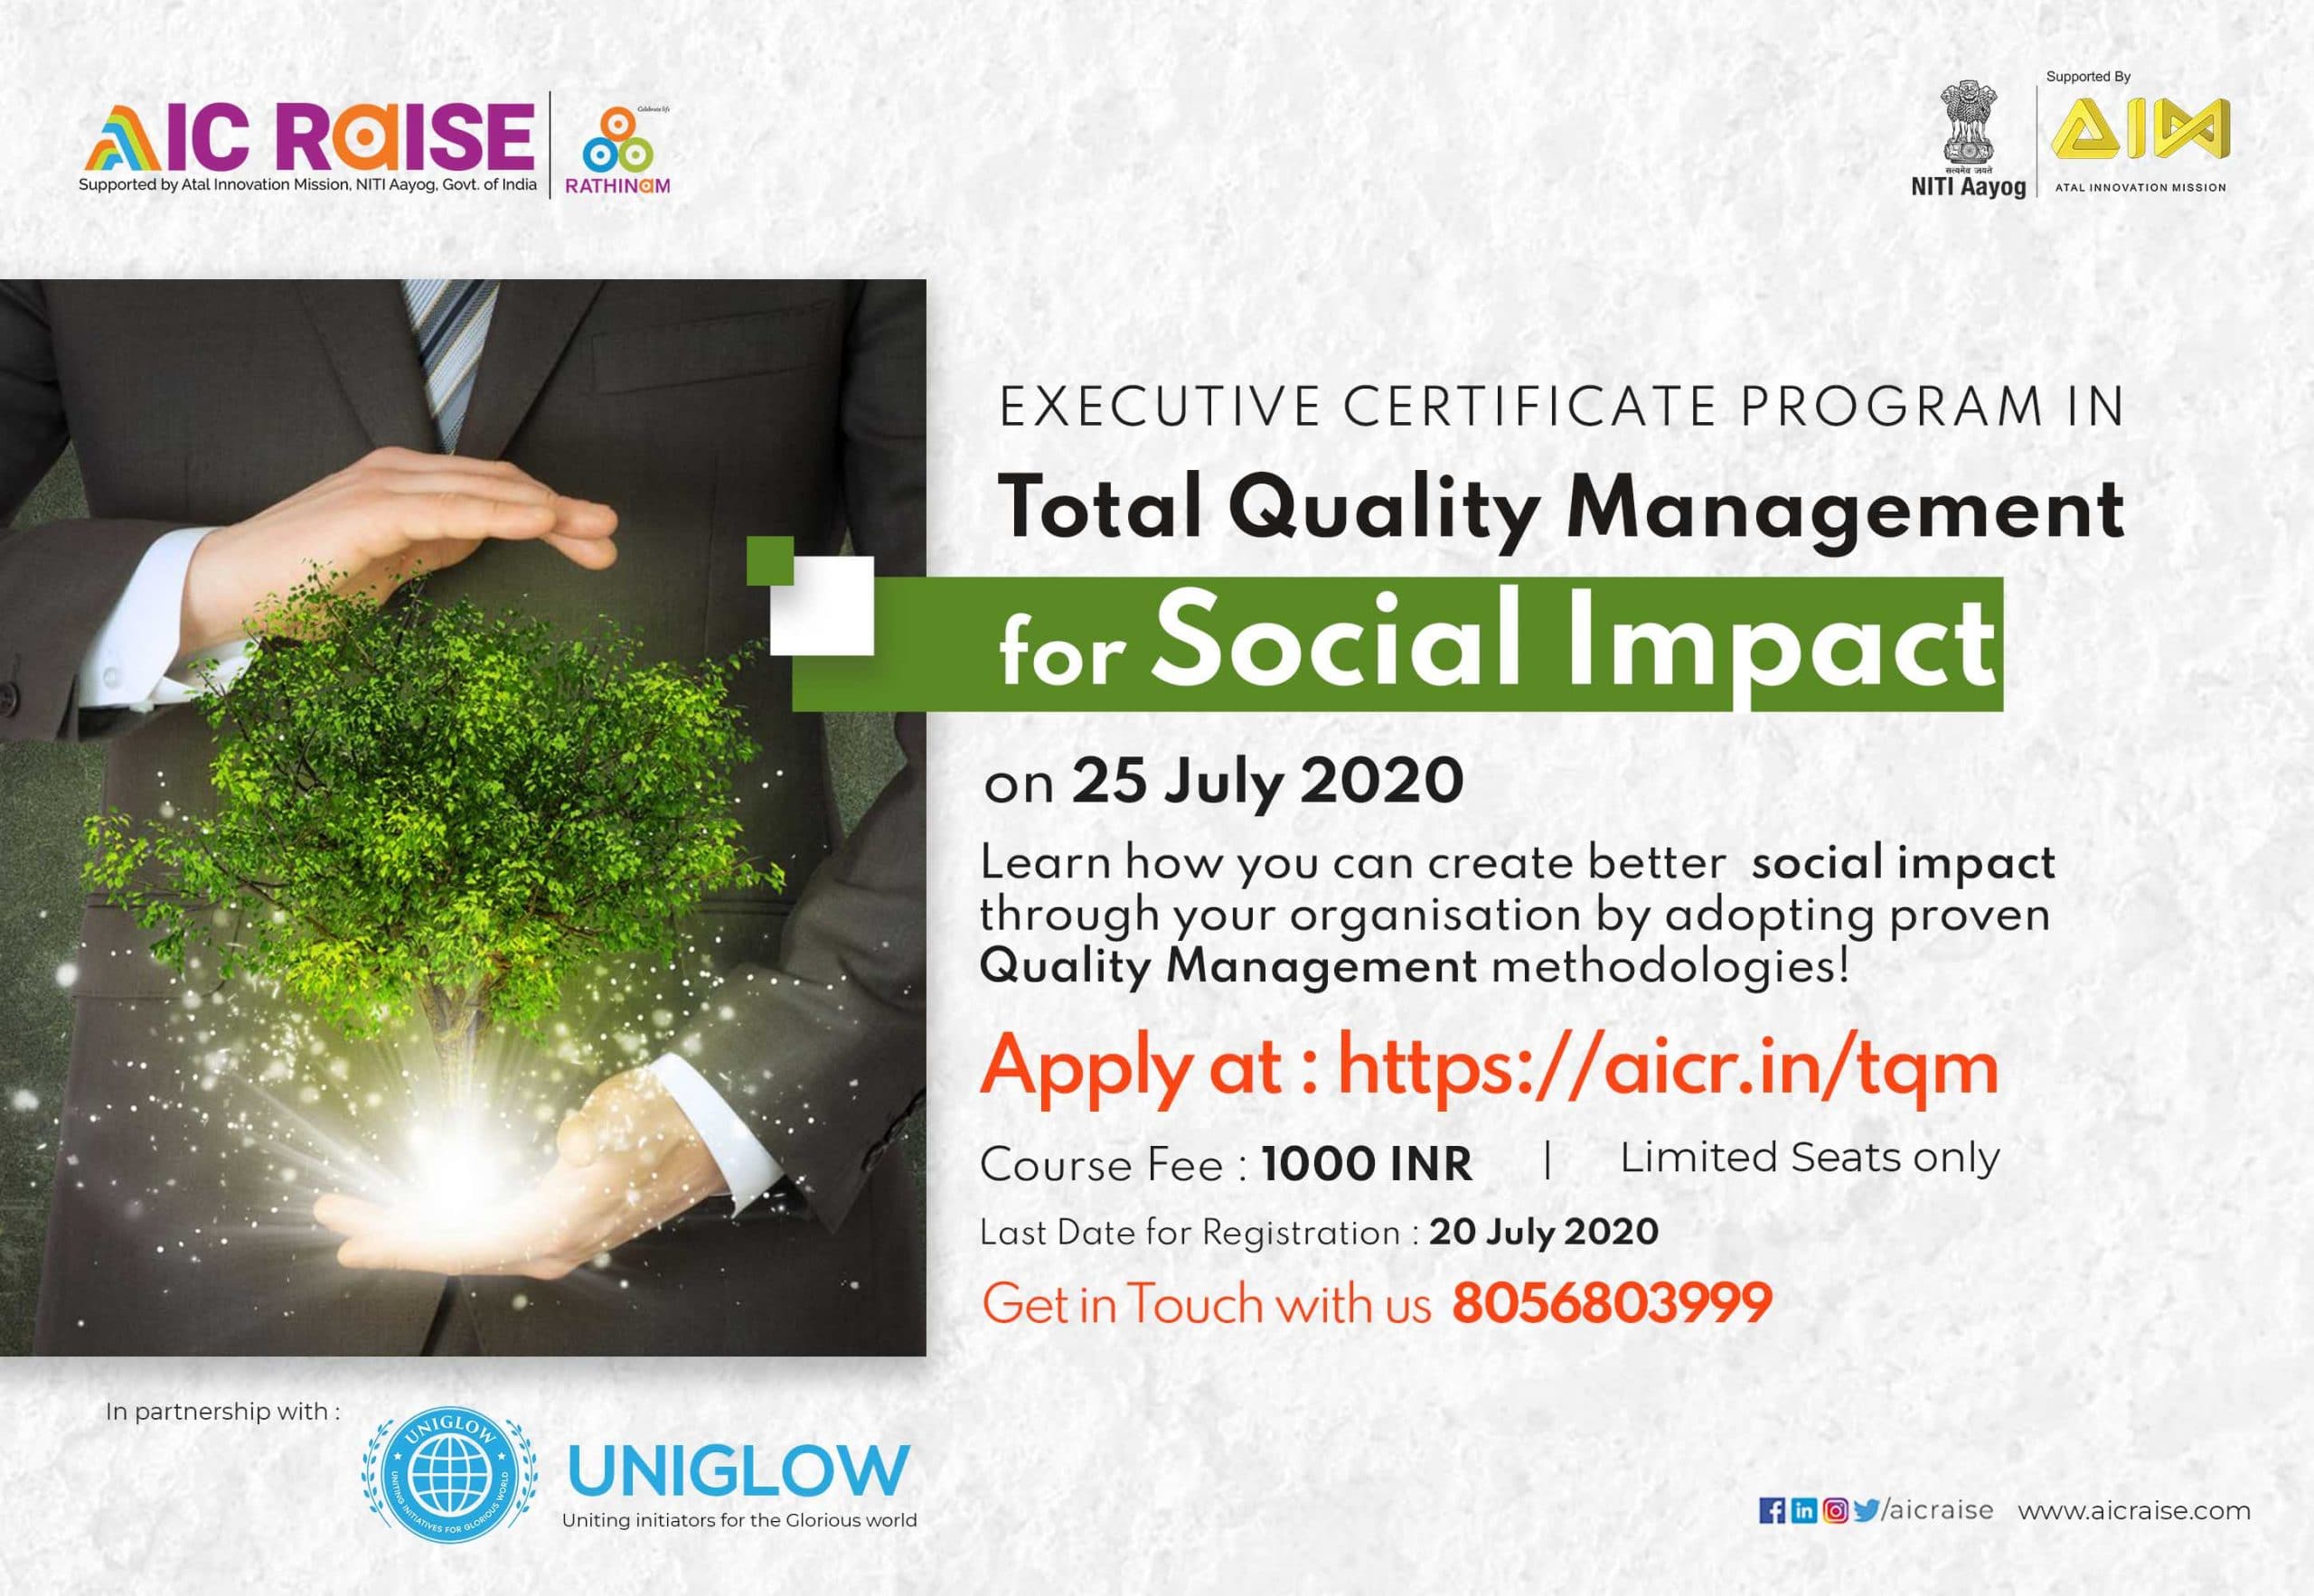 Executive Certificate Program in “Total Quality Management for Social Impact”